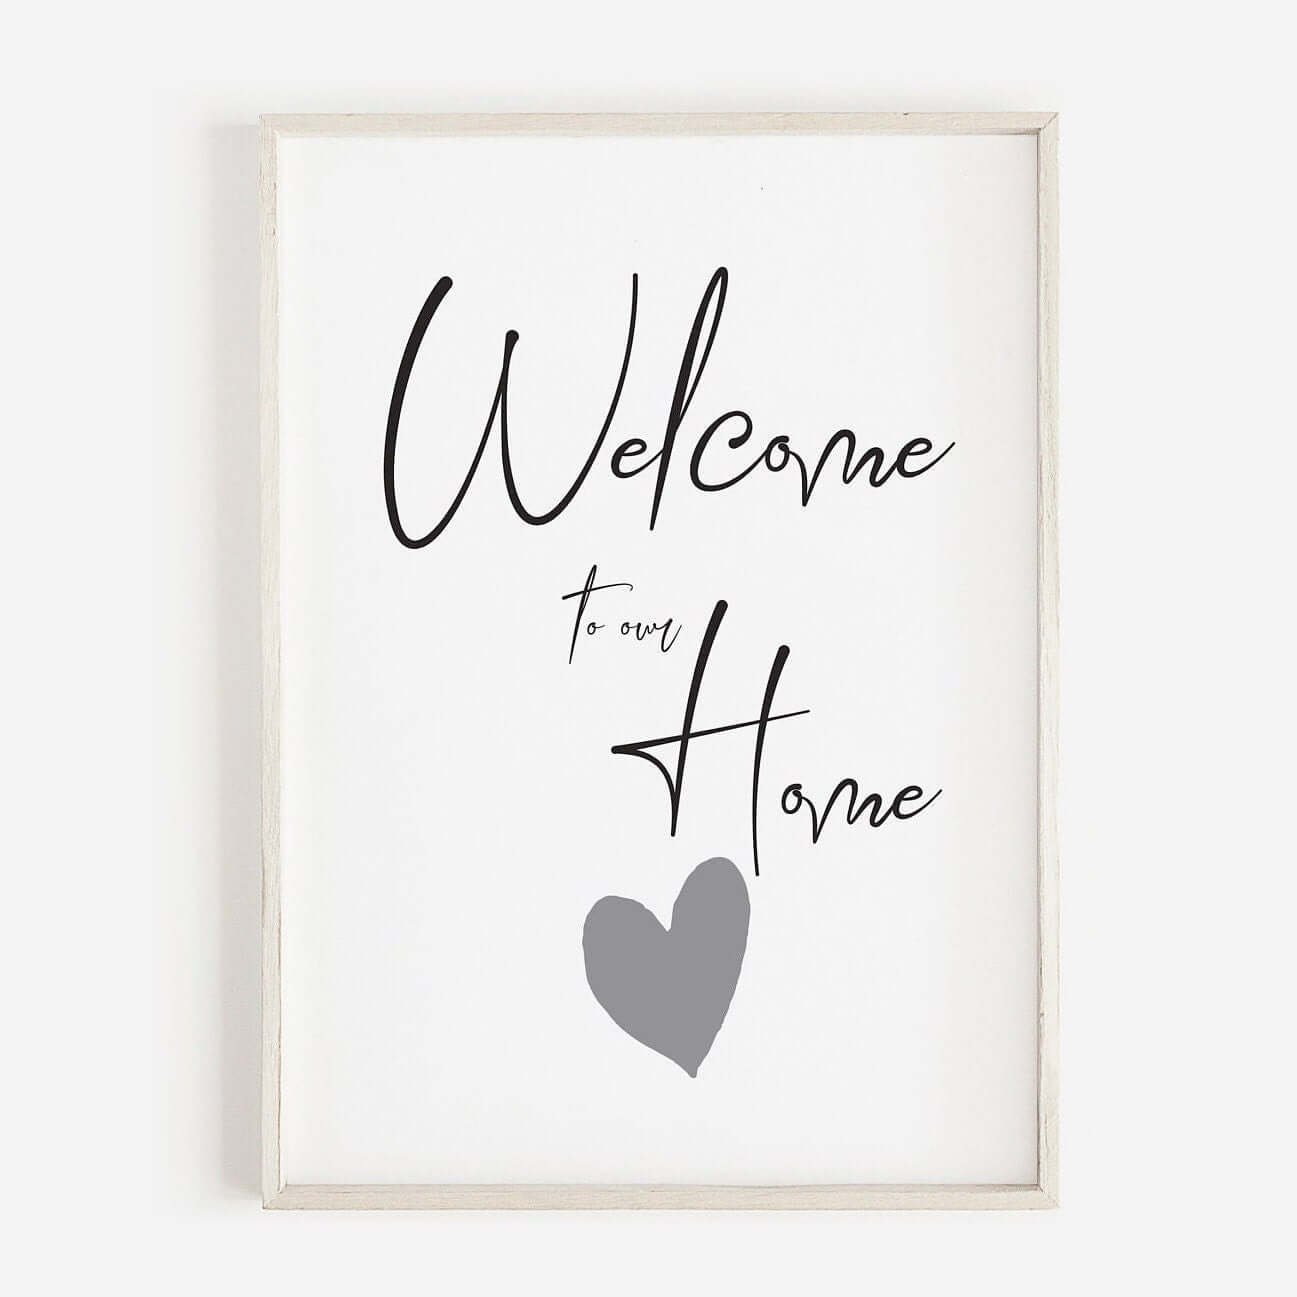 House Warming Gift, Welcome To Our Home Print, Grey Heart, Home Decor Print, New Home Gift, Wall Art, Wall Decor, A3/A4/A5 Prints